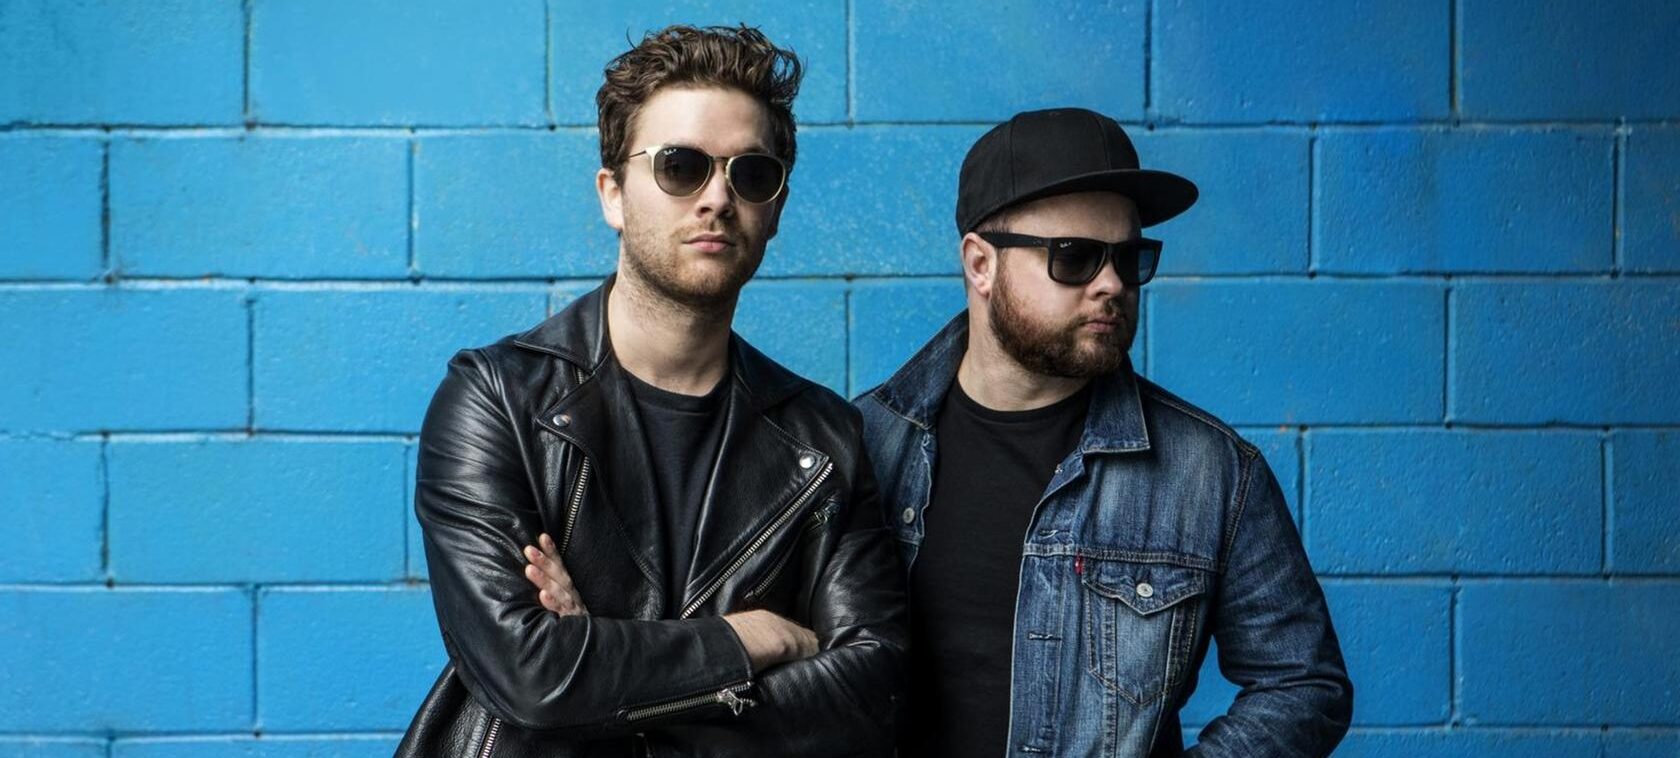 Image of royal Blood singers of Pull me Through